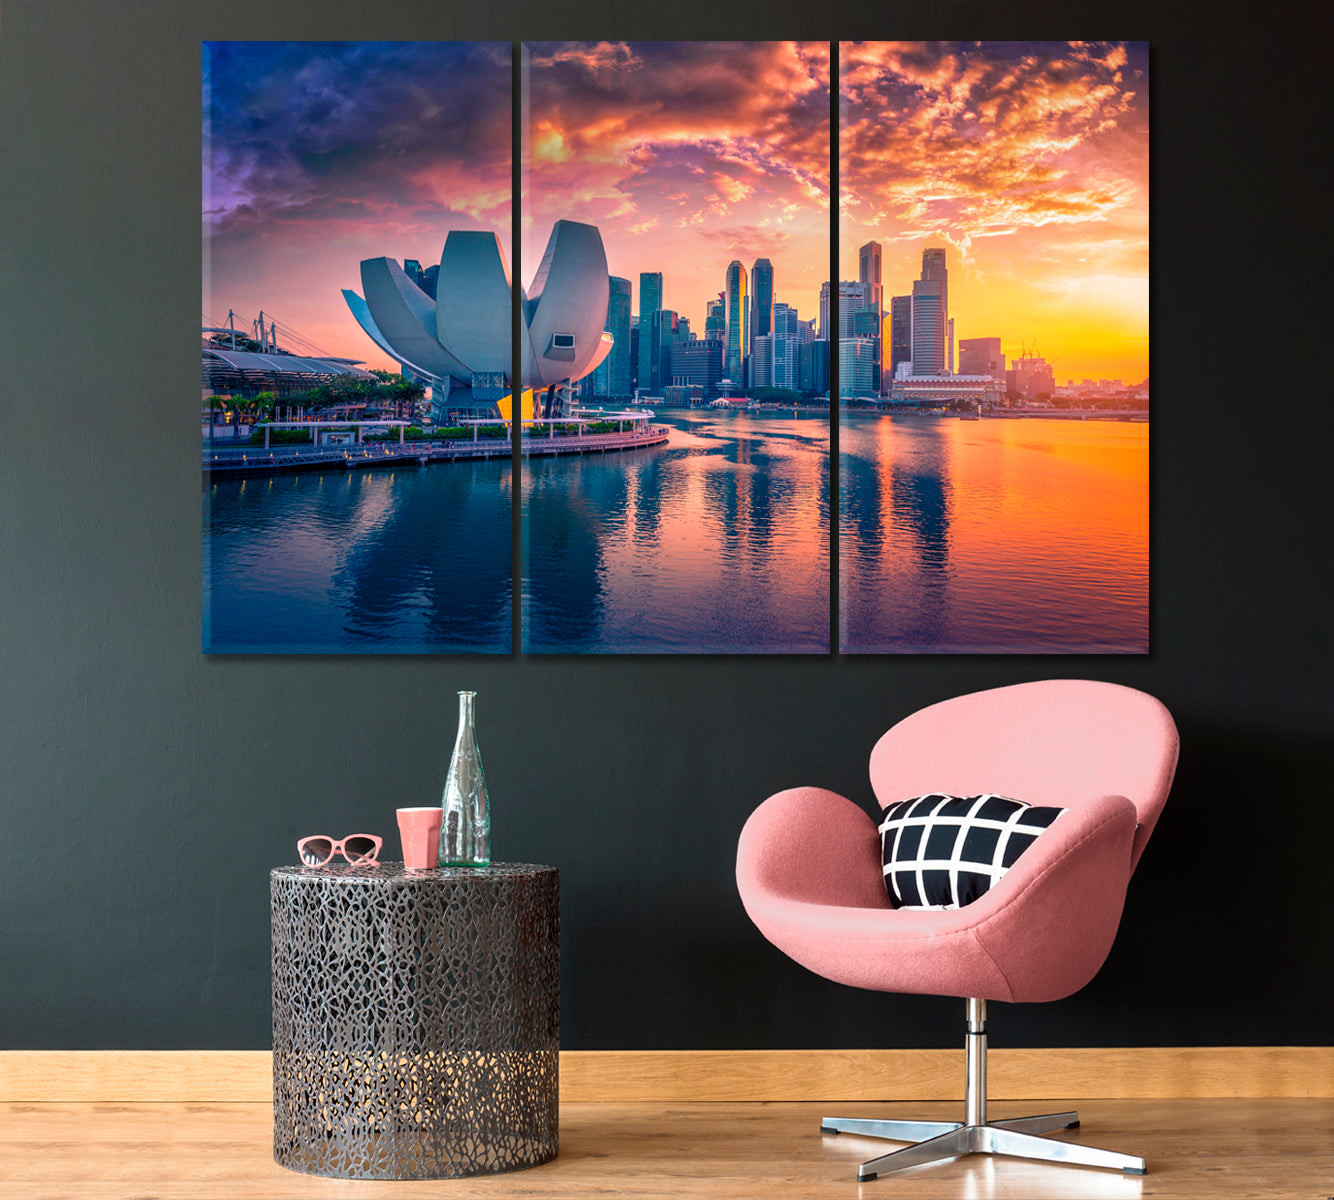 Singapore Skyline with Marina Bay at Sunset Canvas Print ArtLexy 3 Panels 36"x24" inches 